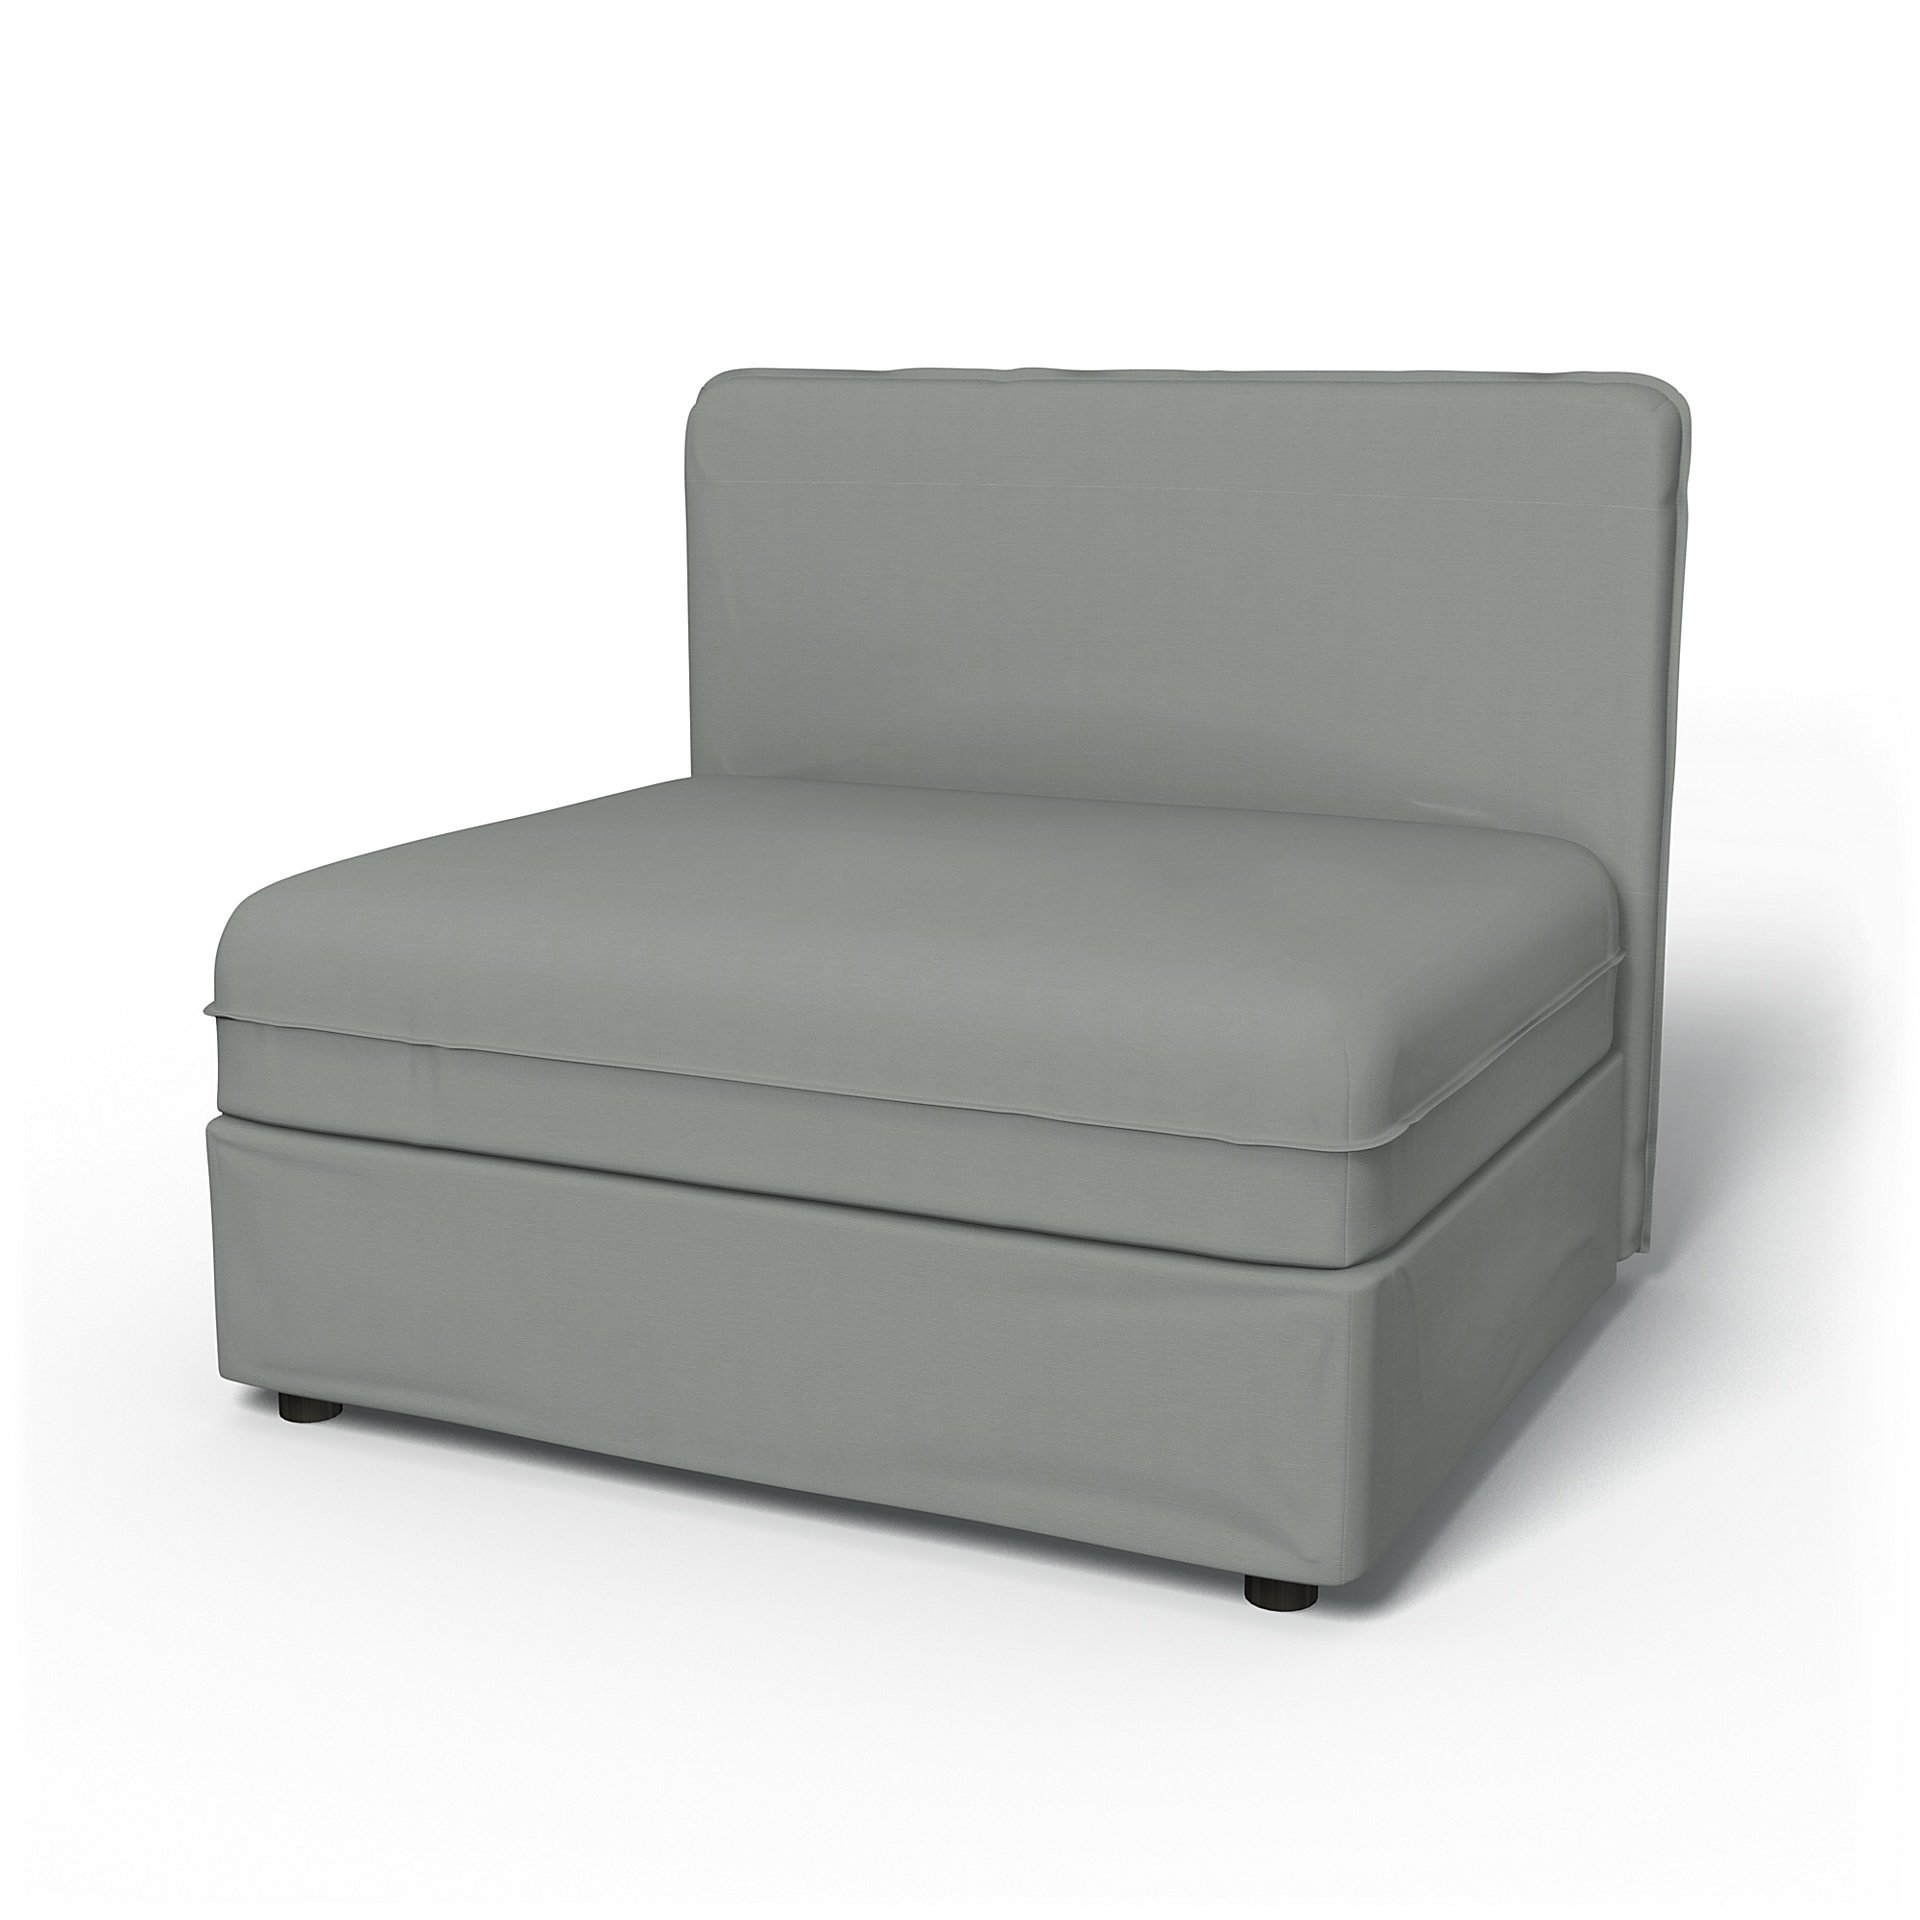 IKEA - Vallentuna Seat Module with Low Back Cover 100x80cm 39x32in, Drizzle, Cotton - Bemz